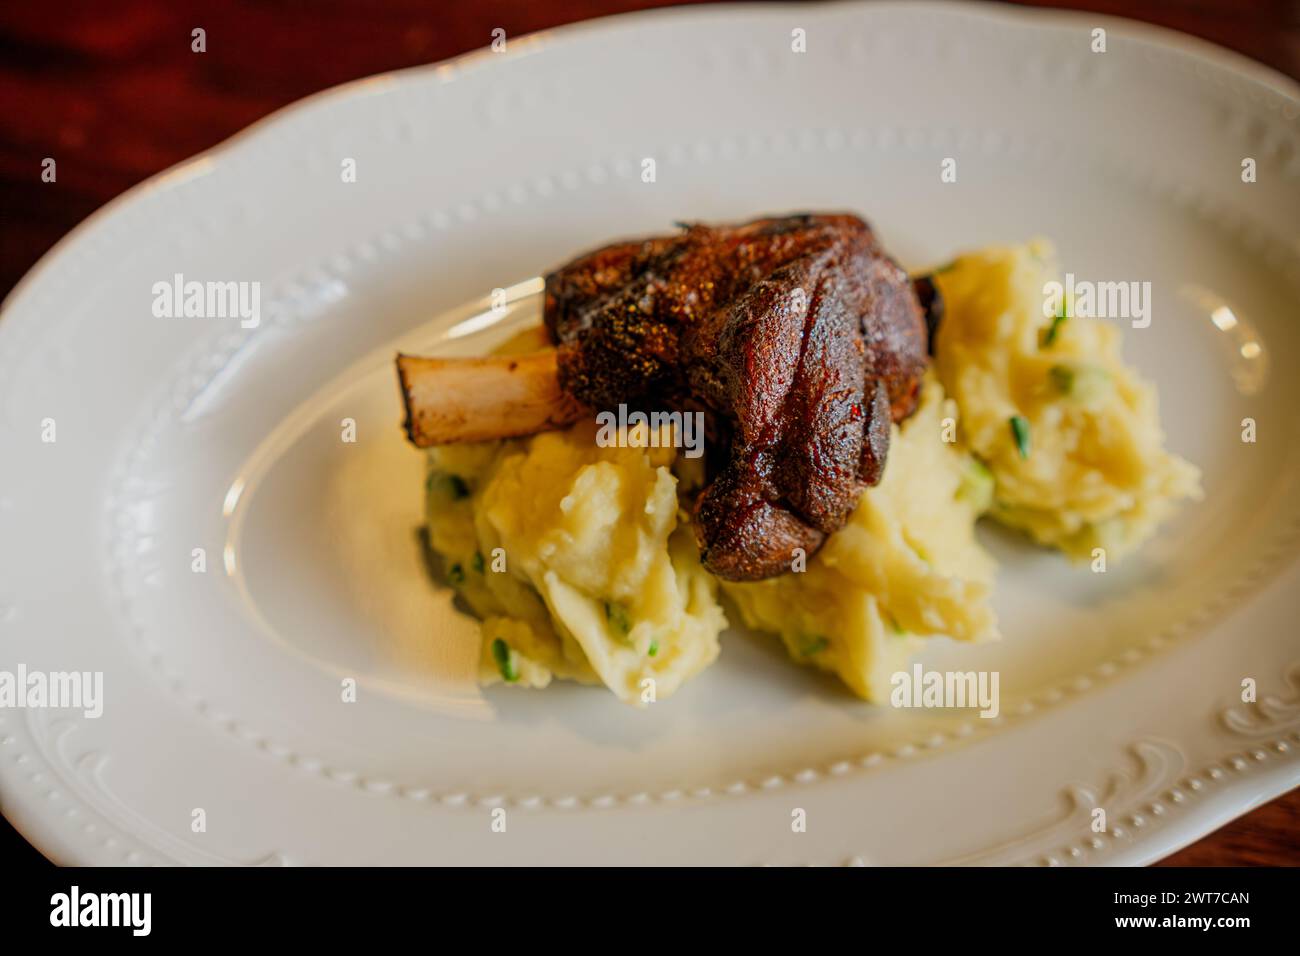 Succulent Baked Lamb Shank Served Atop Creamy Mashed Potatoes on a White Plate. Stock Photo